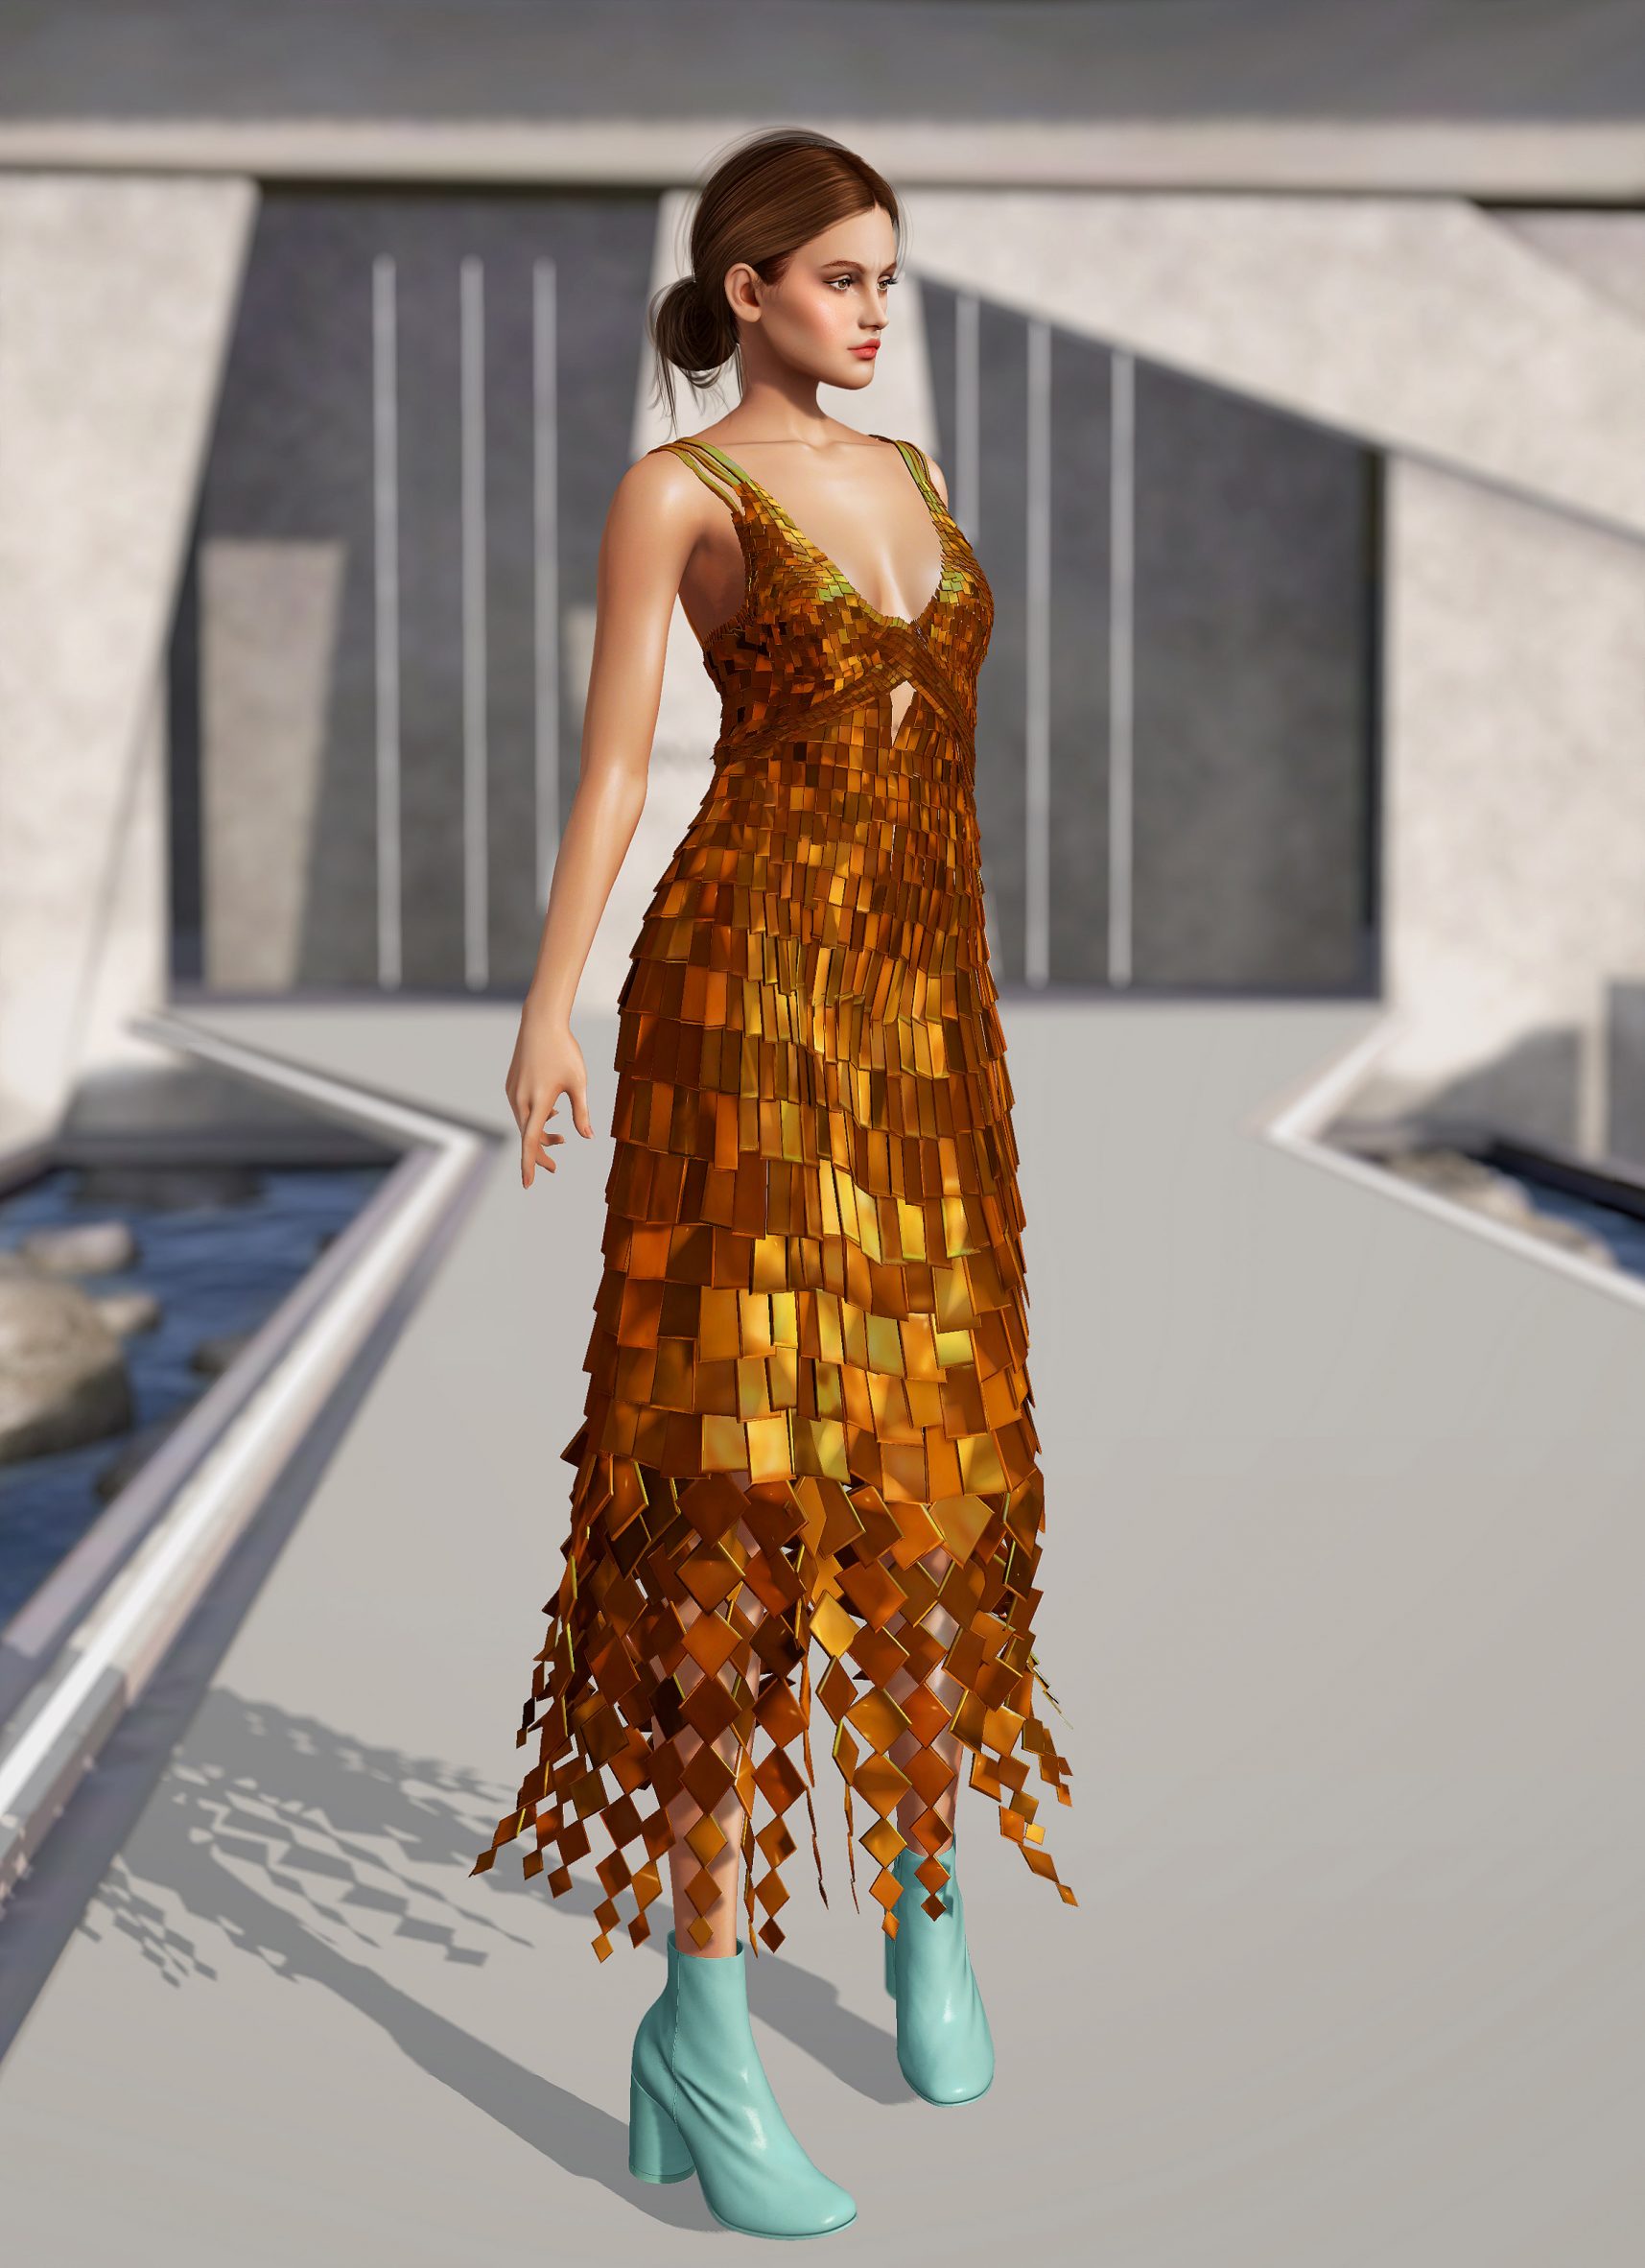 Jonathan Simkhai stages FW22 fashion show in Second Life